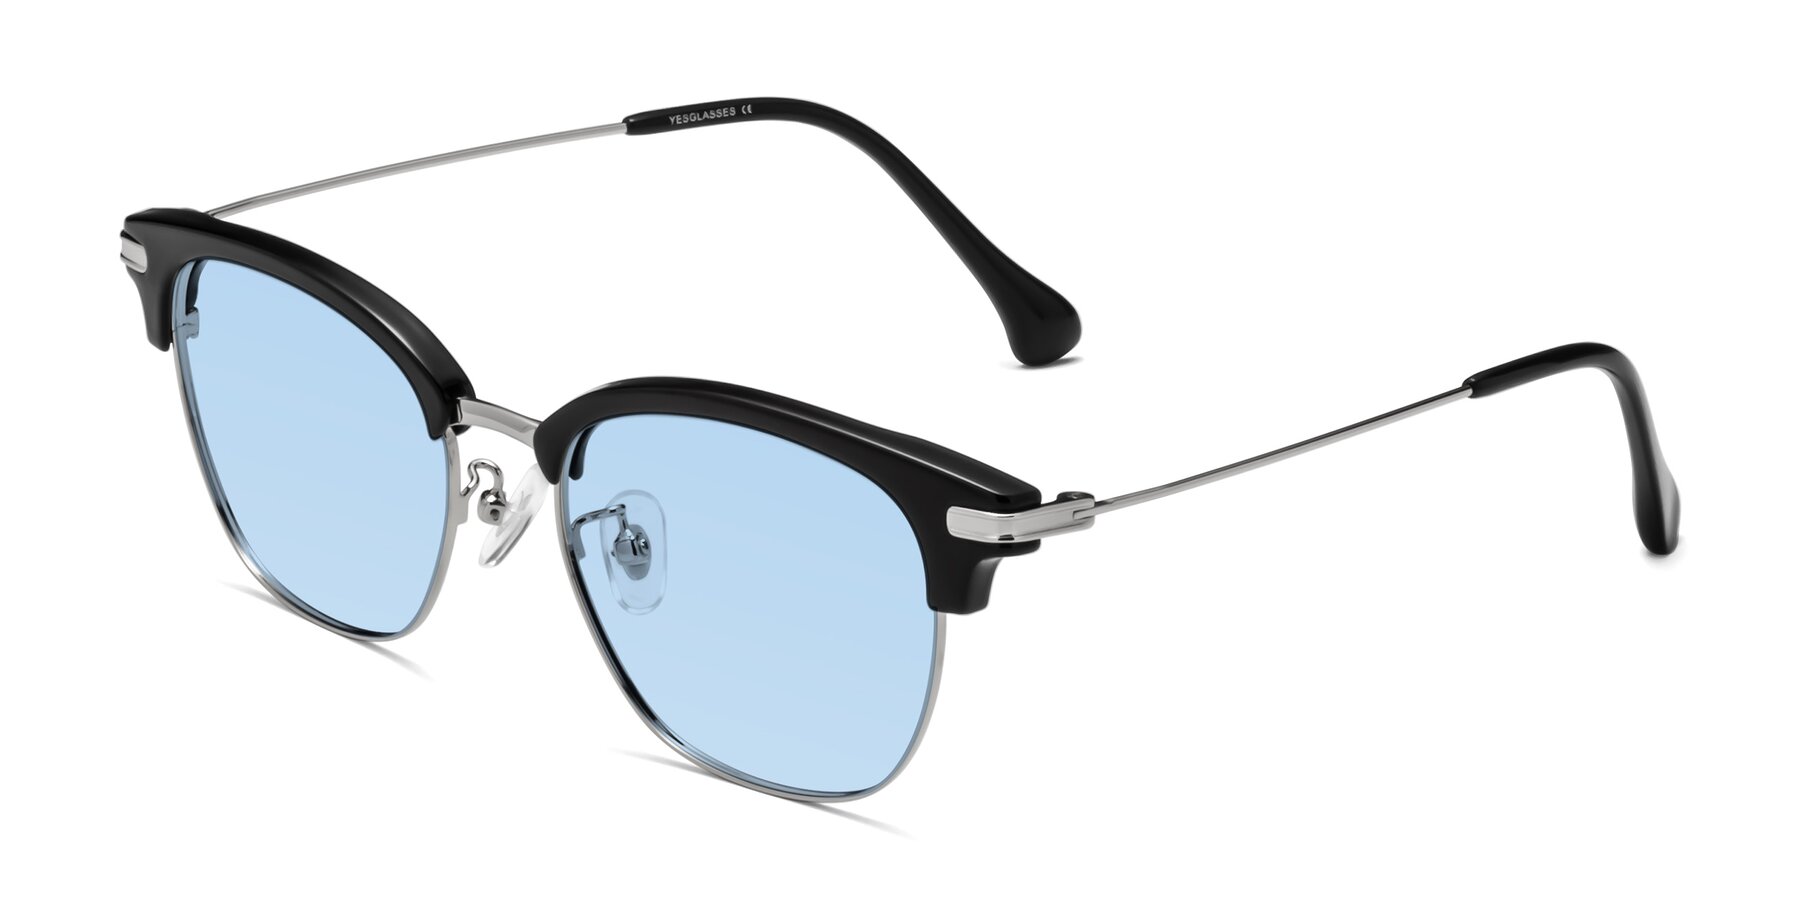 Angle of Obrien in Black-Sliver with Light Blue Tinted Lenses